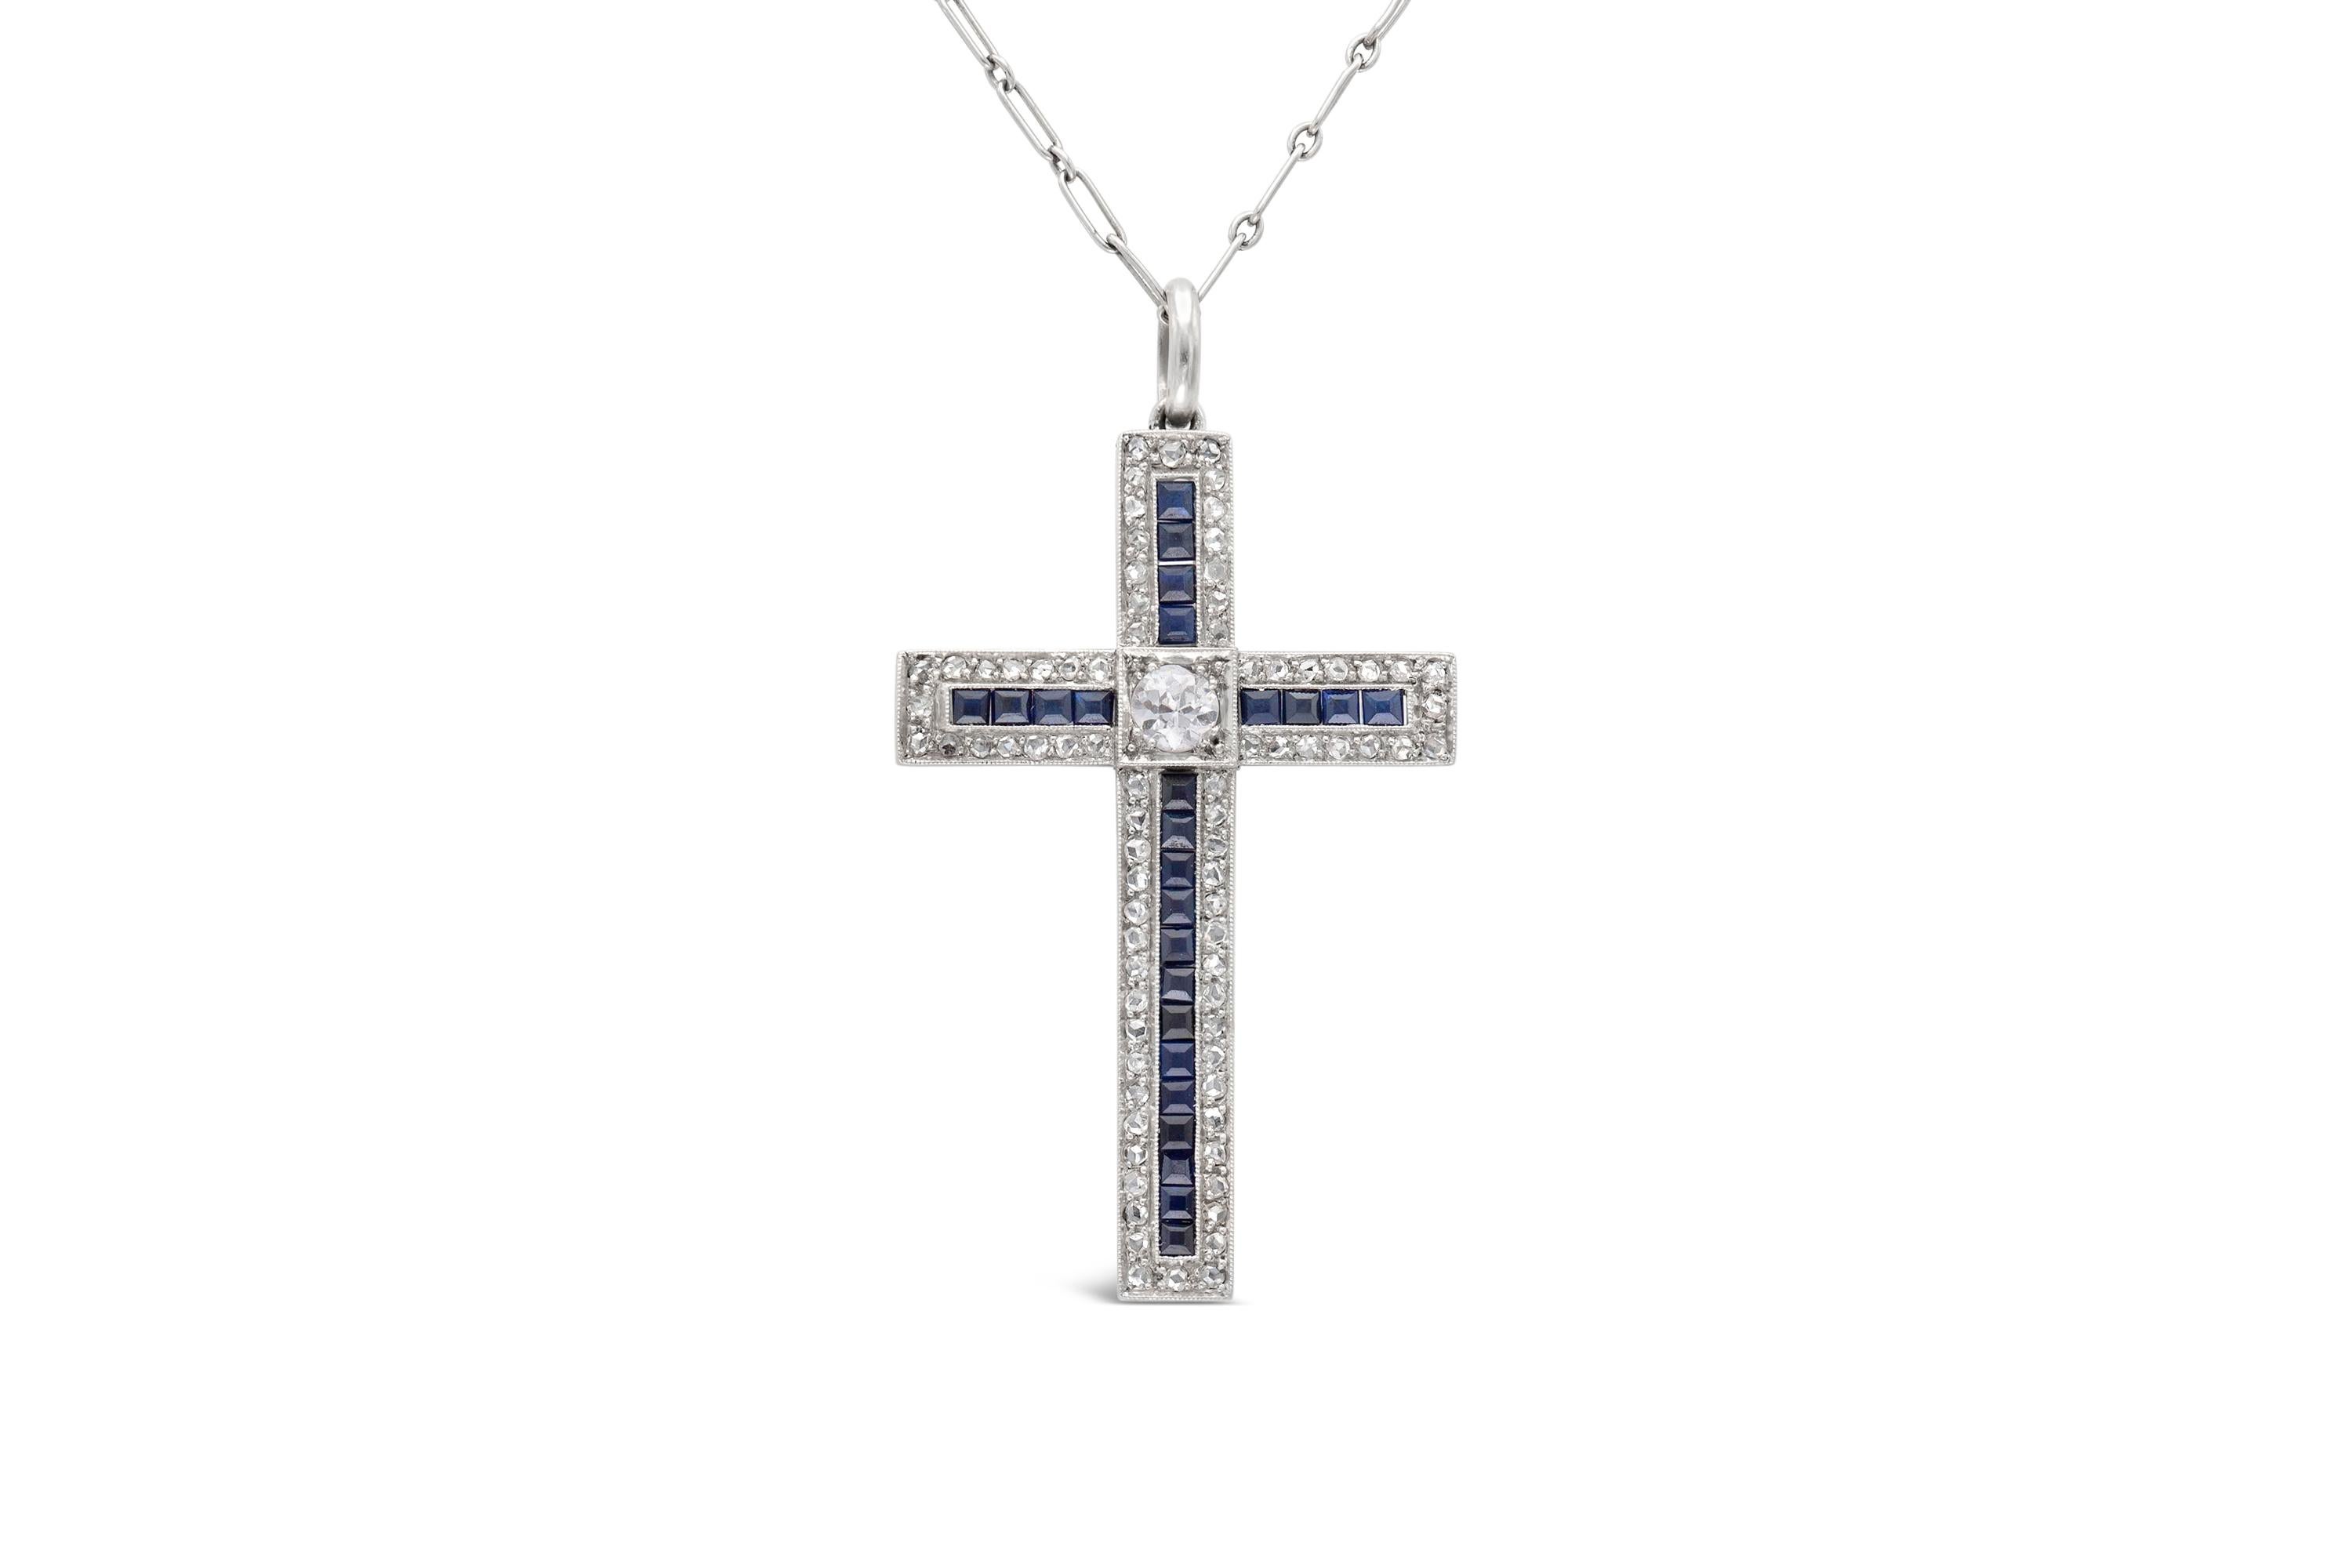 Finely crafted in platinum, featuring a center Old European-cut diamond weighing approximately 0.40 carat with an additional 0.80 carat of rose-cut diamonds and French-cut sapphires weighing approximately 0.72 carat. Circa 1920's-30's.
The cross